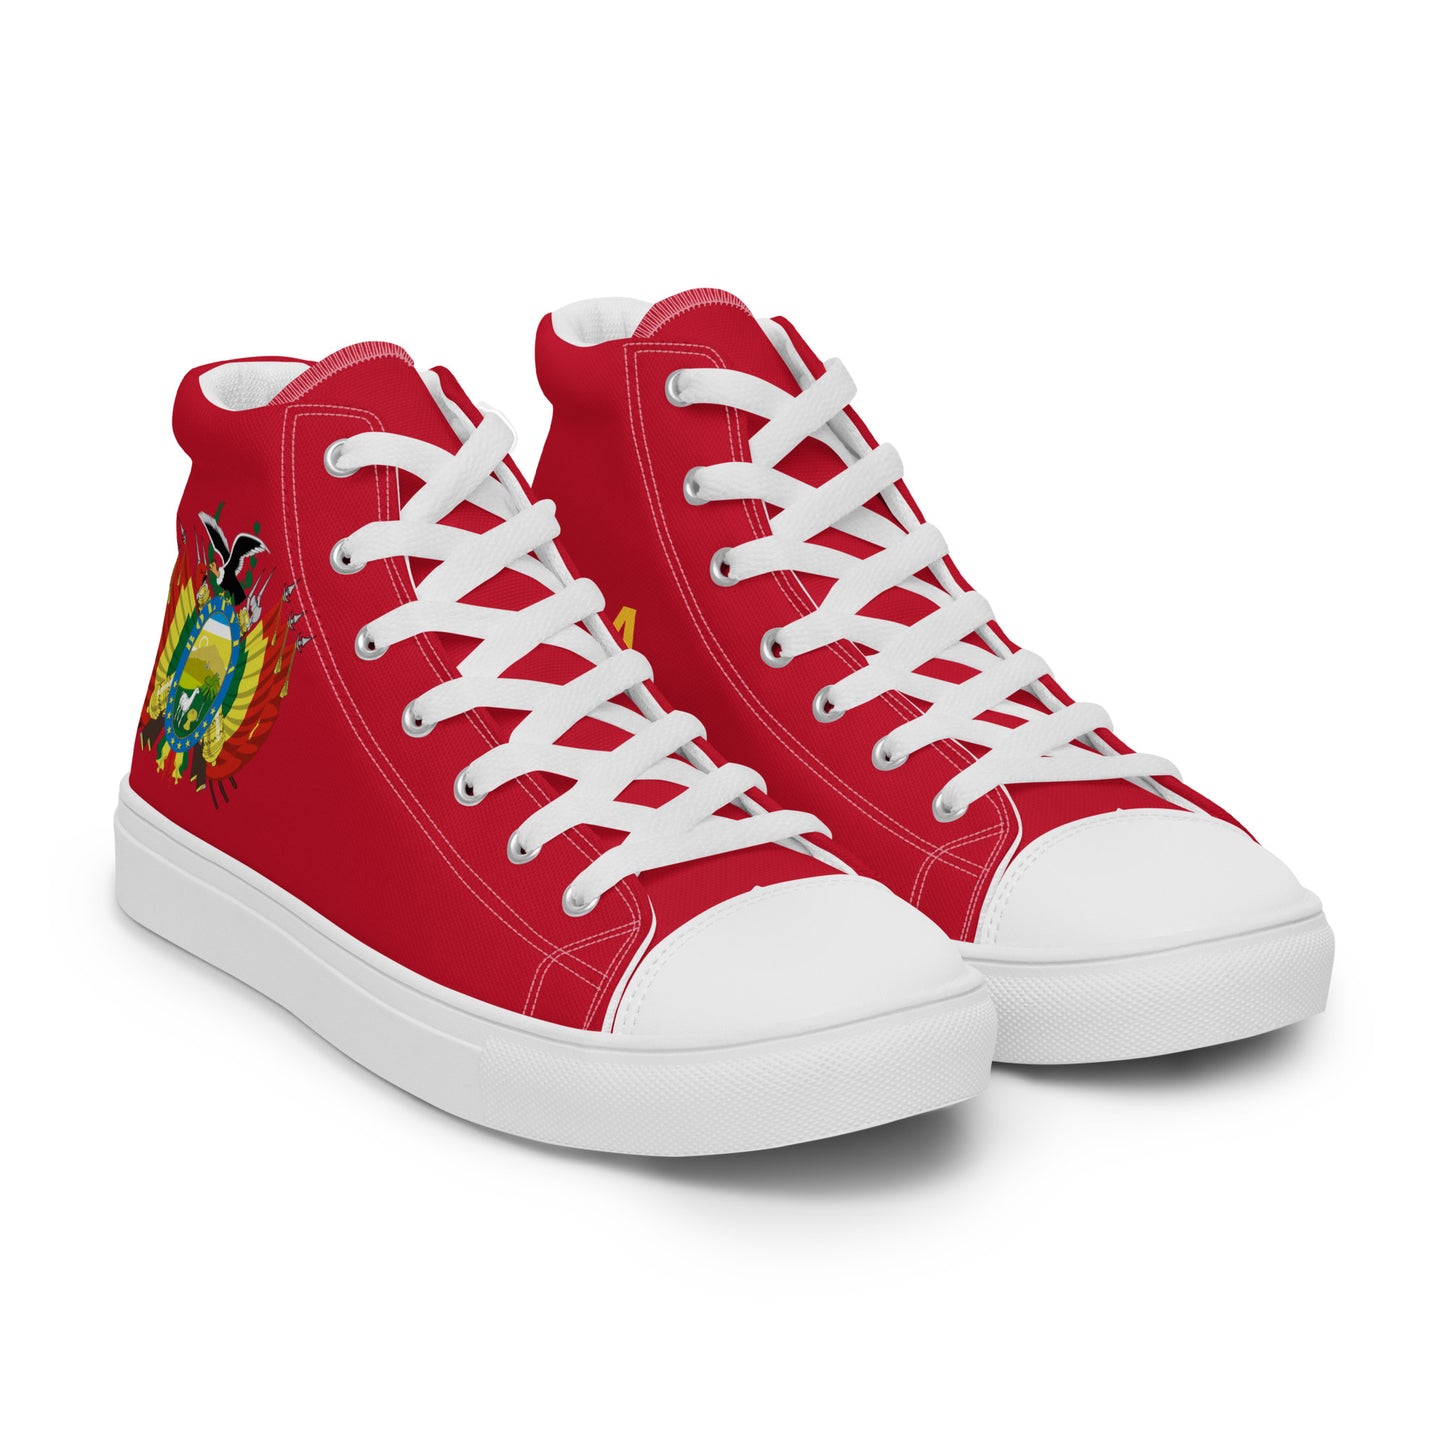 Bolivia - Men - Red - High top shoes